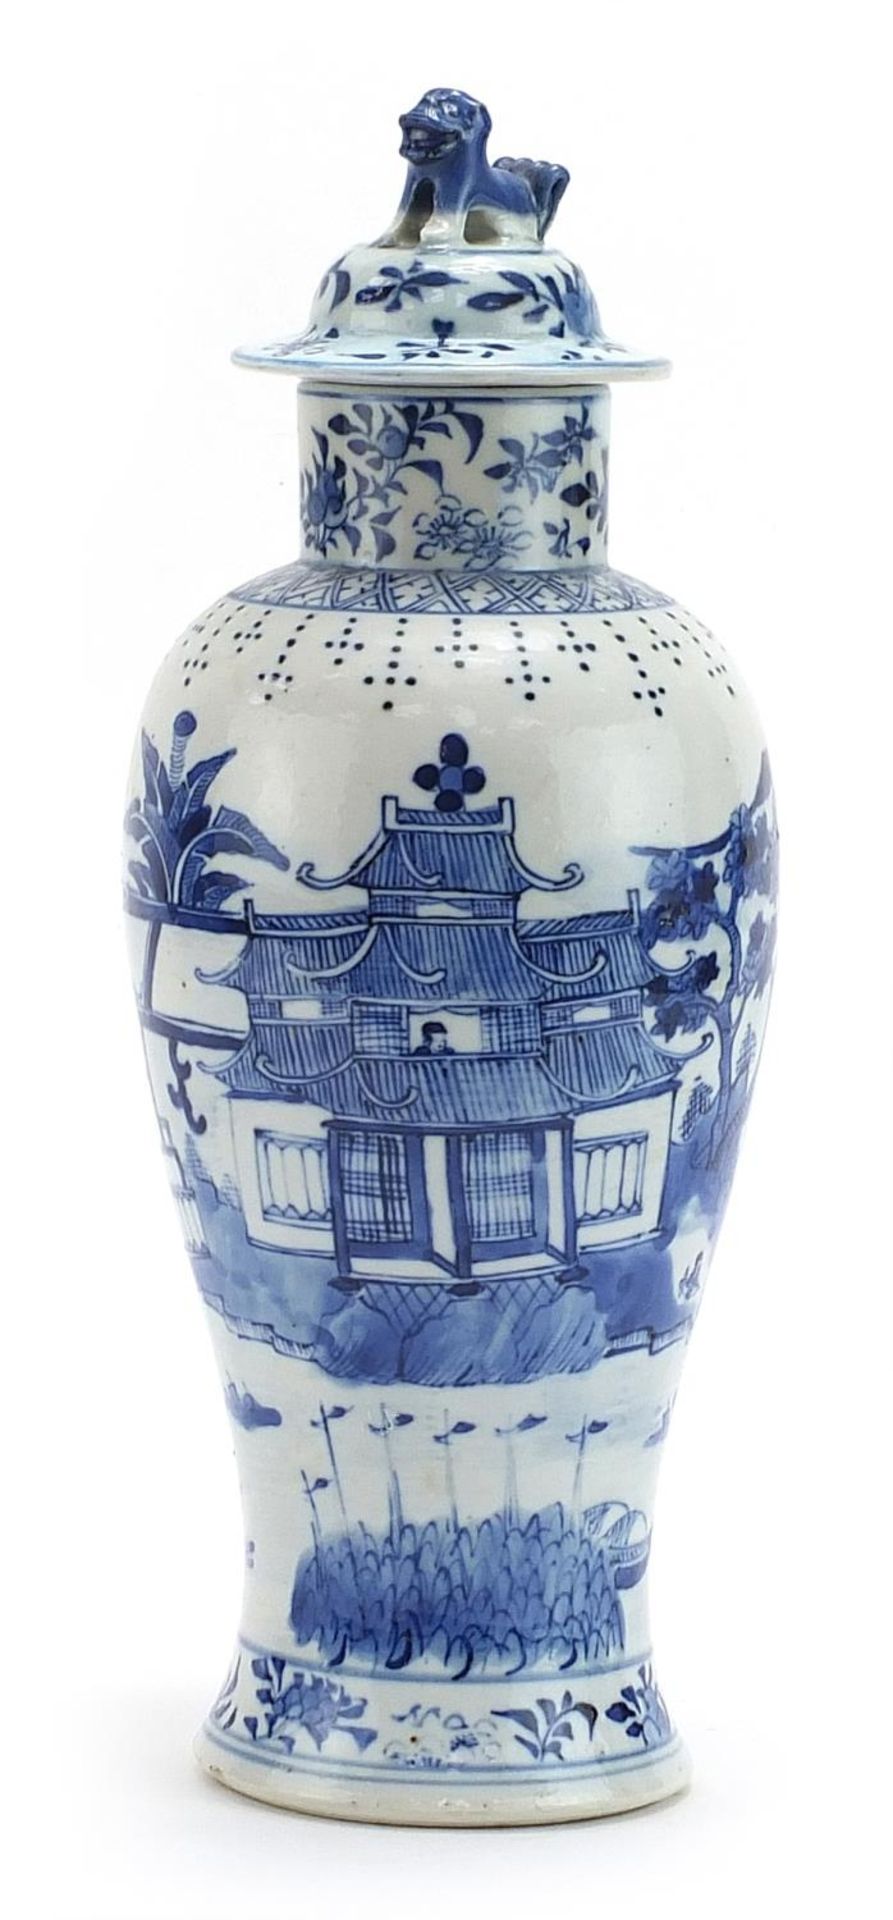 Chinese blue and white porcelain baluster vase and cover hand painted with figures in a palace